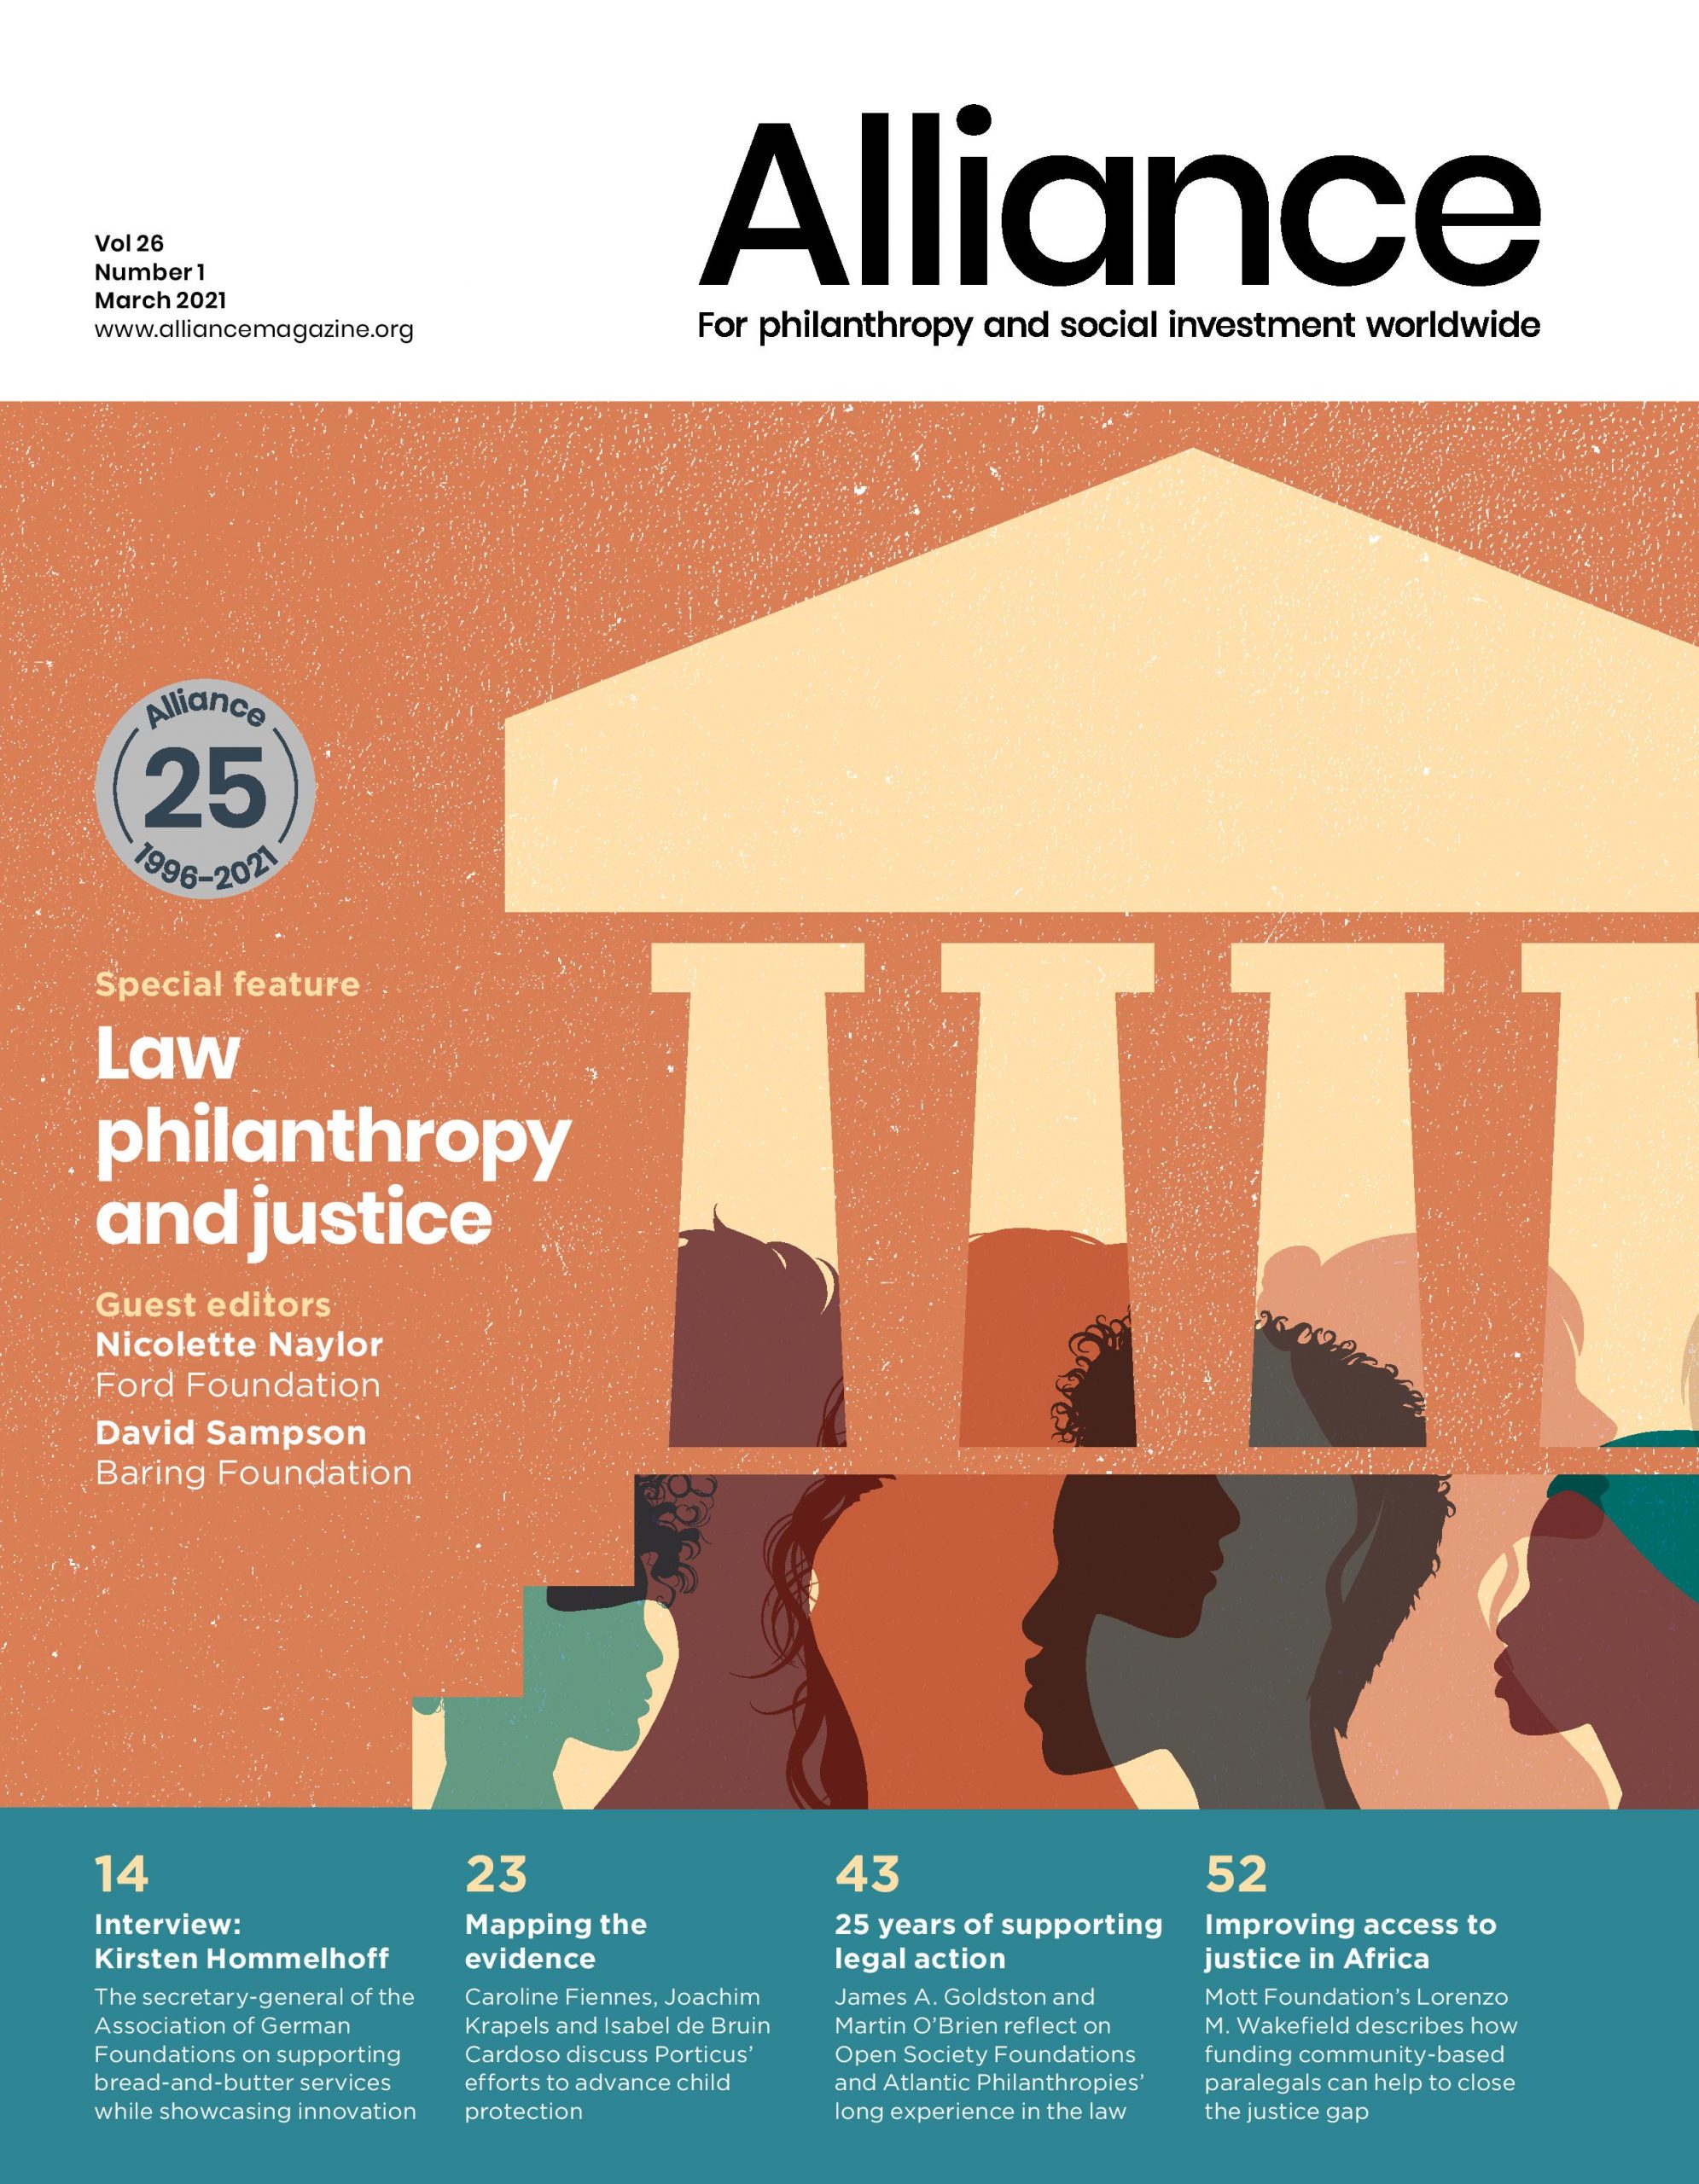 Cover for Alliance magazine's March 2021 issue on law and philanthropy.